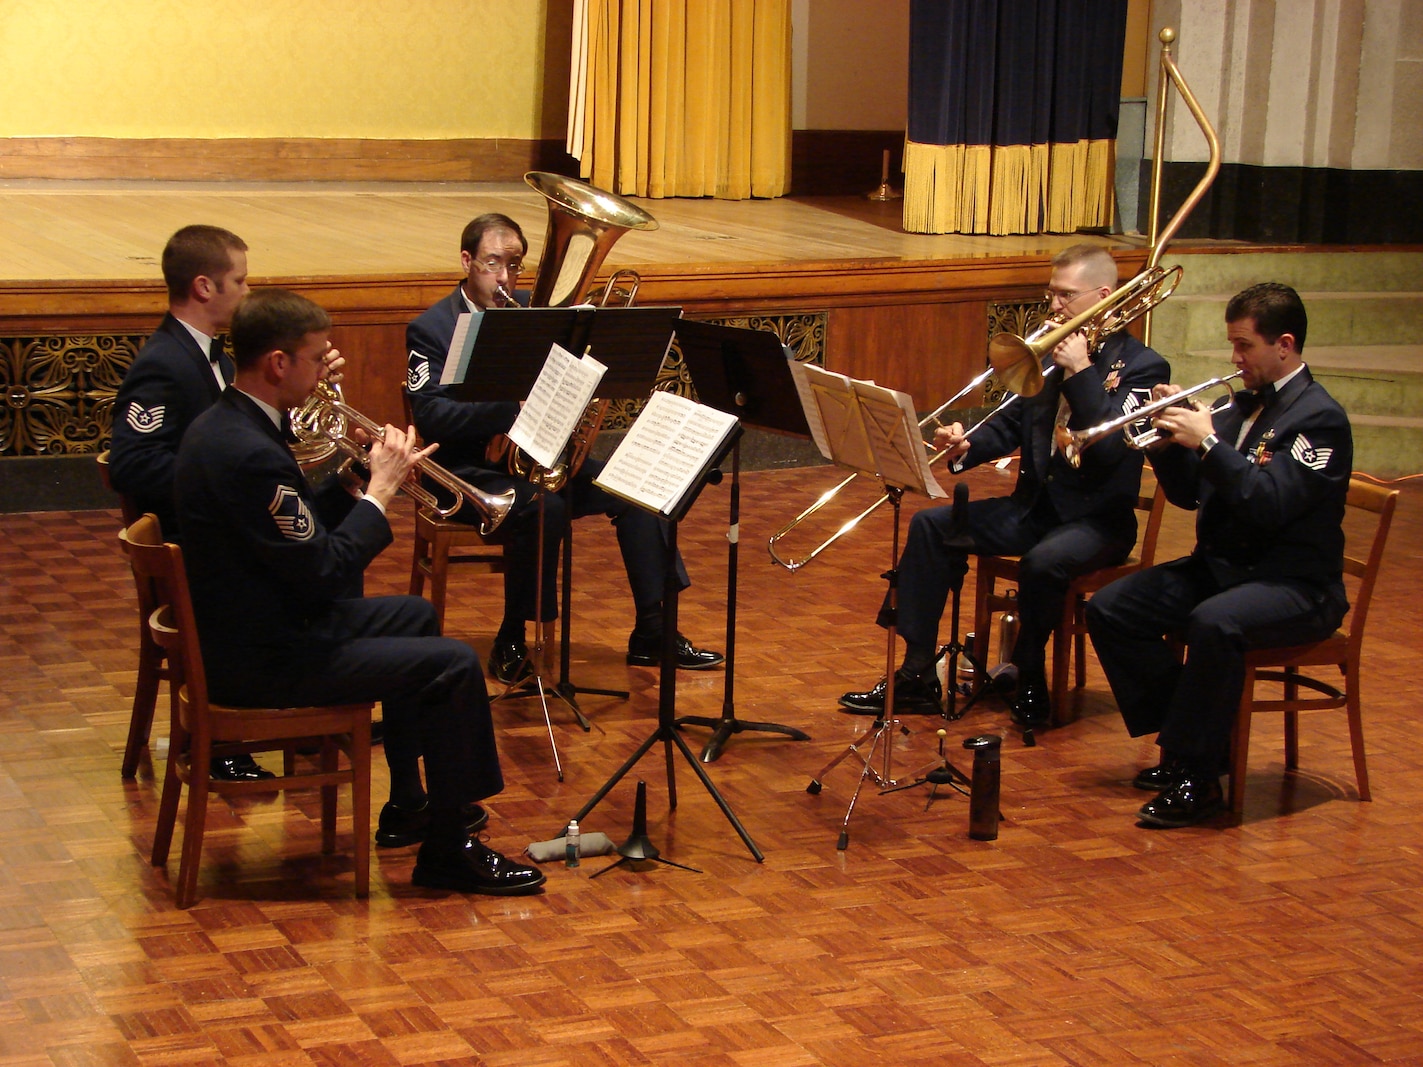 The USAF Band's Brass Quintet performing on January 8, 2010, at the George Washington Masonic Memorial in Alexandria, Va.  This concert was part of The U.S. Air Force Band's Chamber Players Series.  These free concerts feature smaller ensembles performing throughout the  year at more intimate settings in and around Washington, D.C.